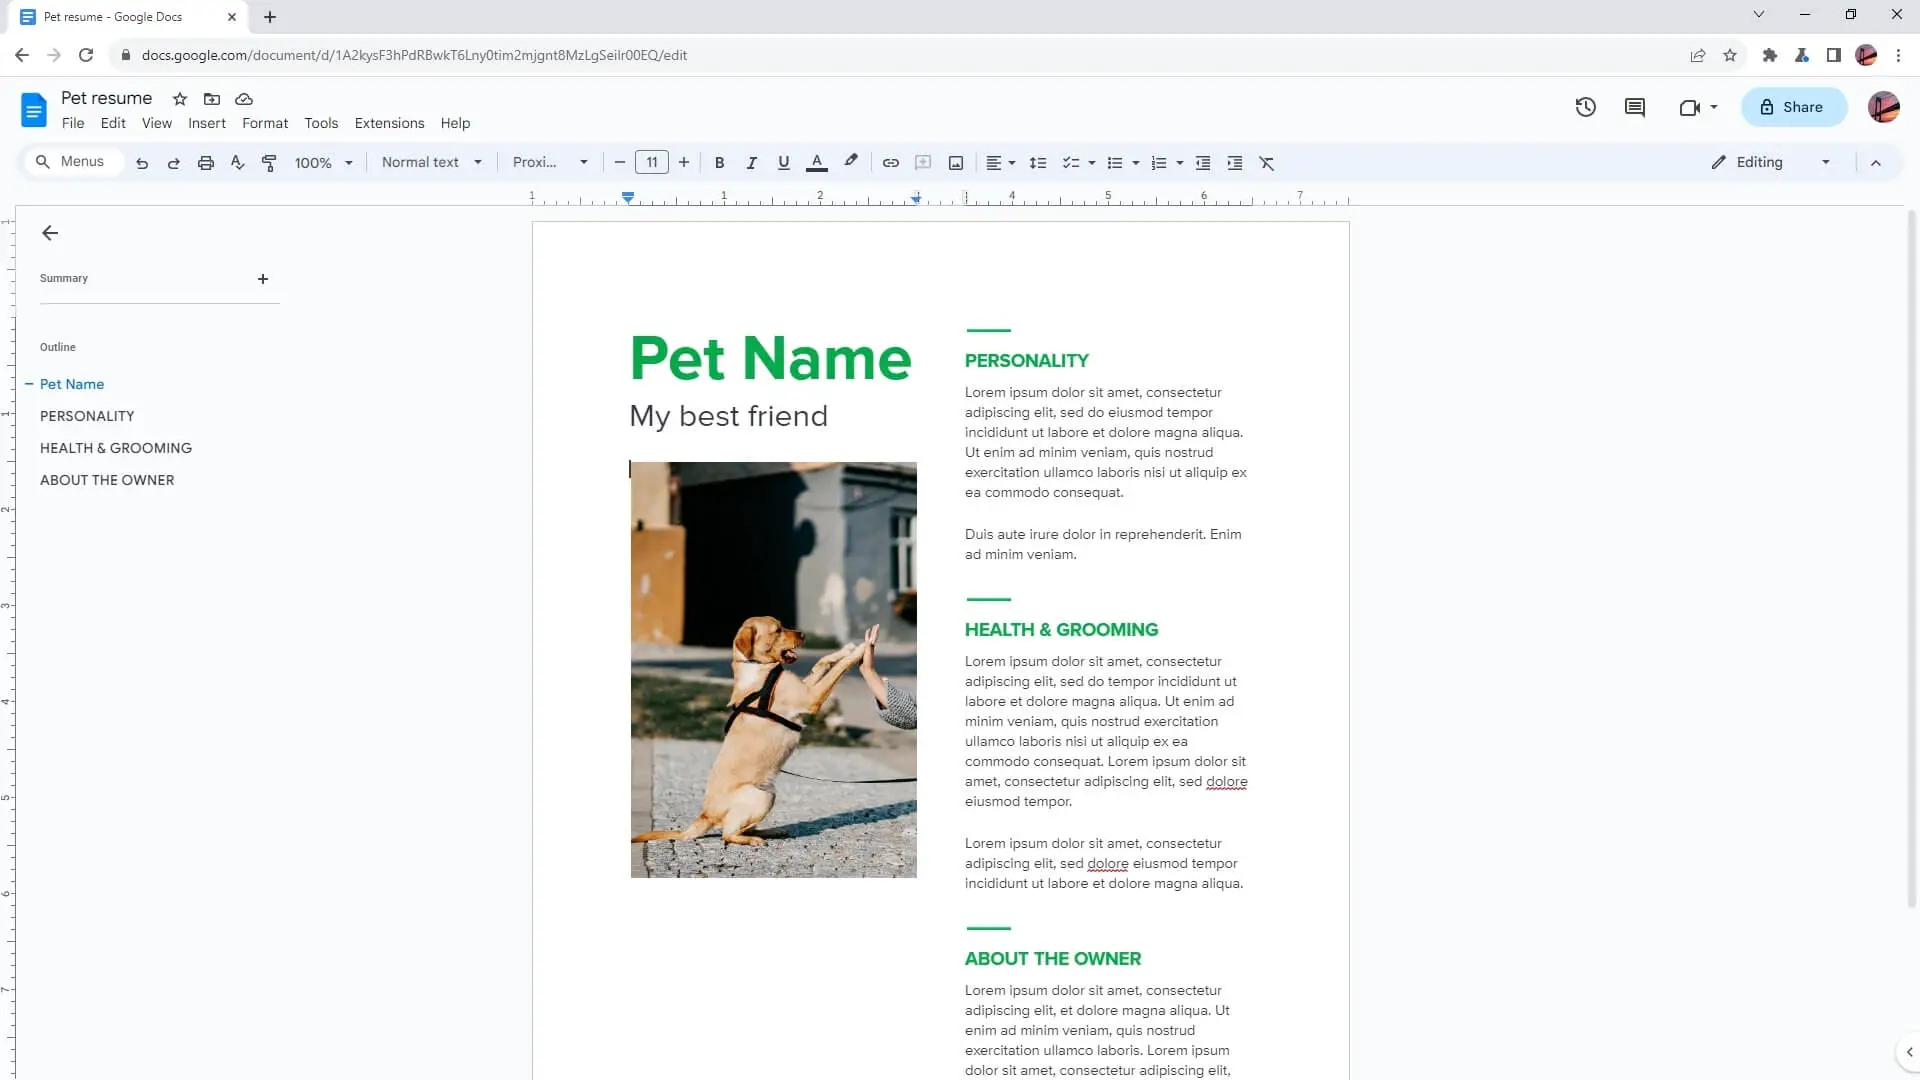 Image 187 How to Crop an Image in Google Docs